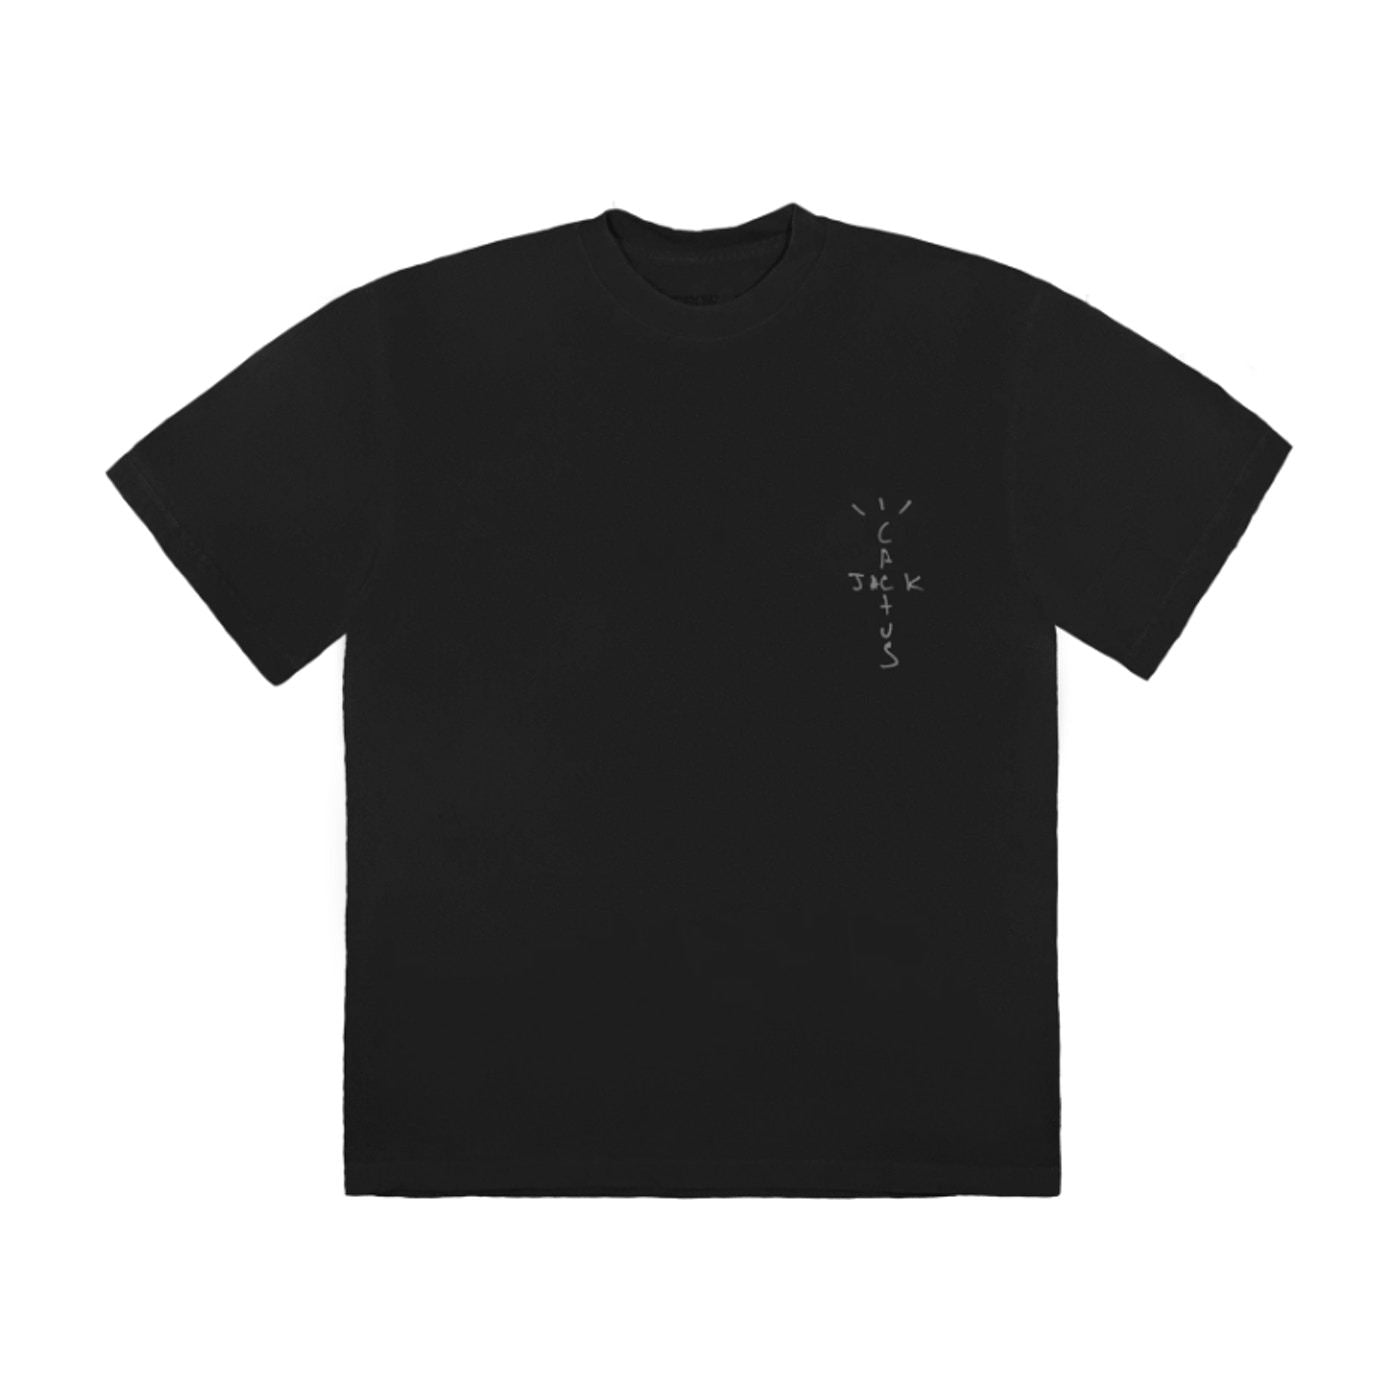 Cactus Jack tee cracked - Centrall Online